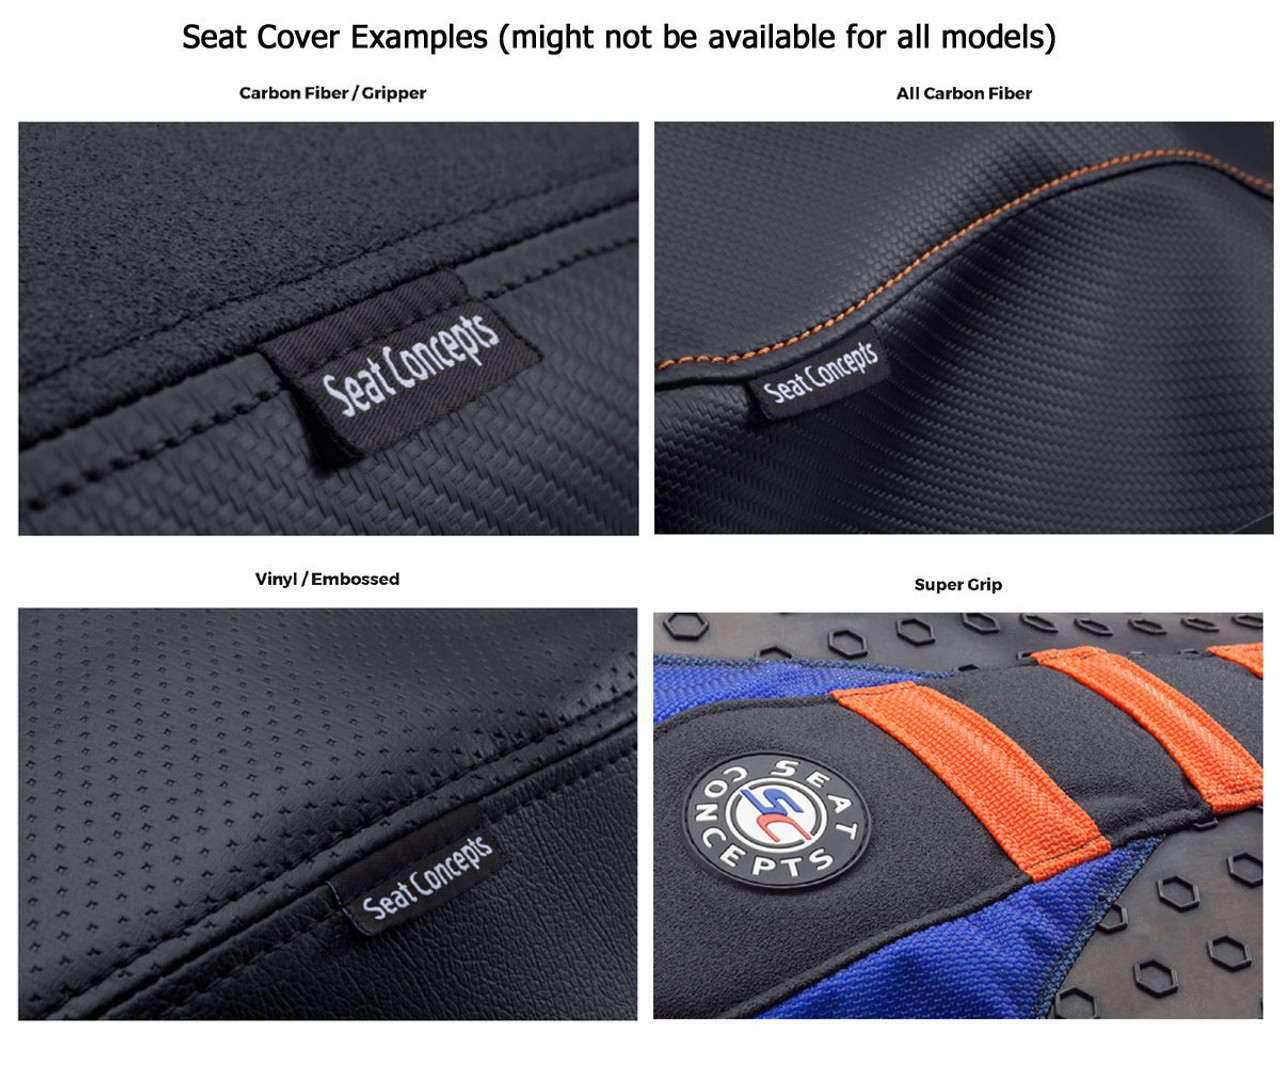 Seat Concepts Seat Cover Types